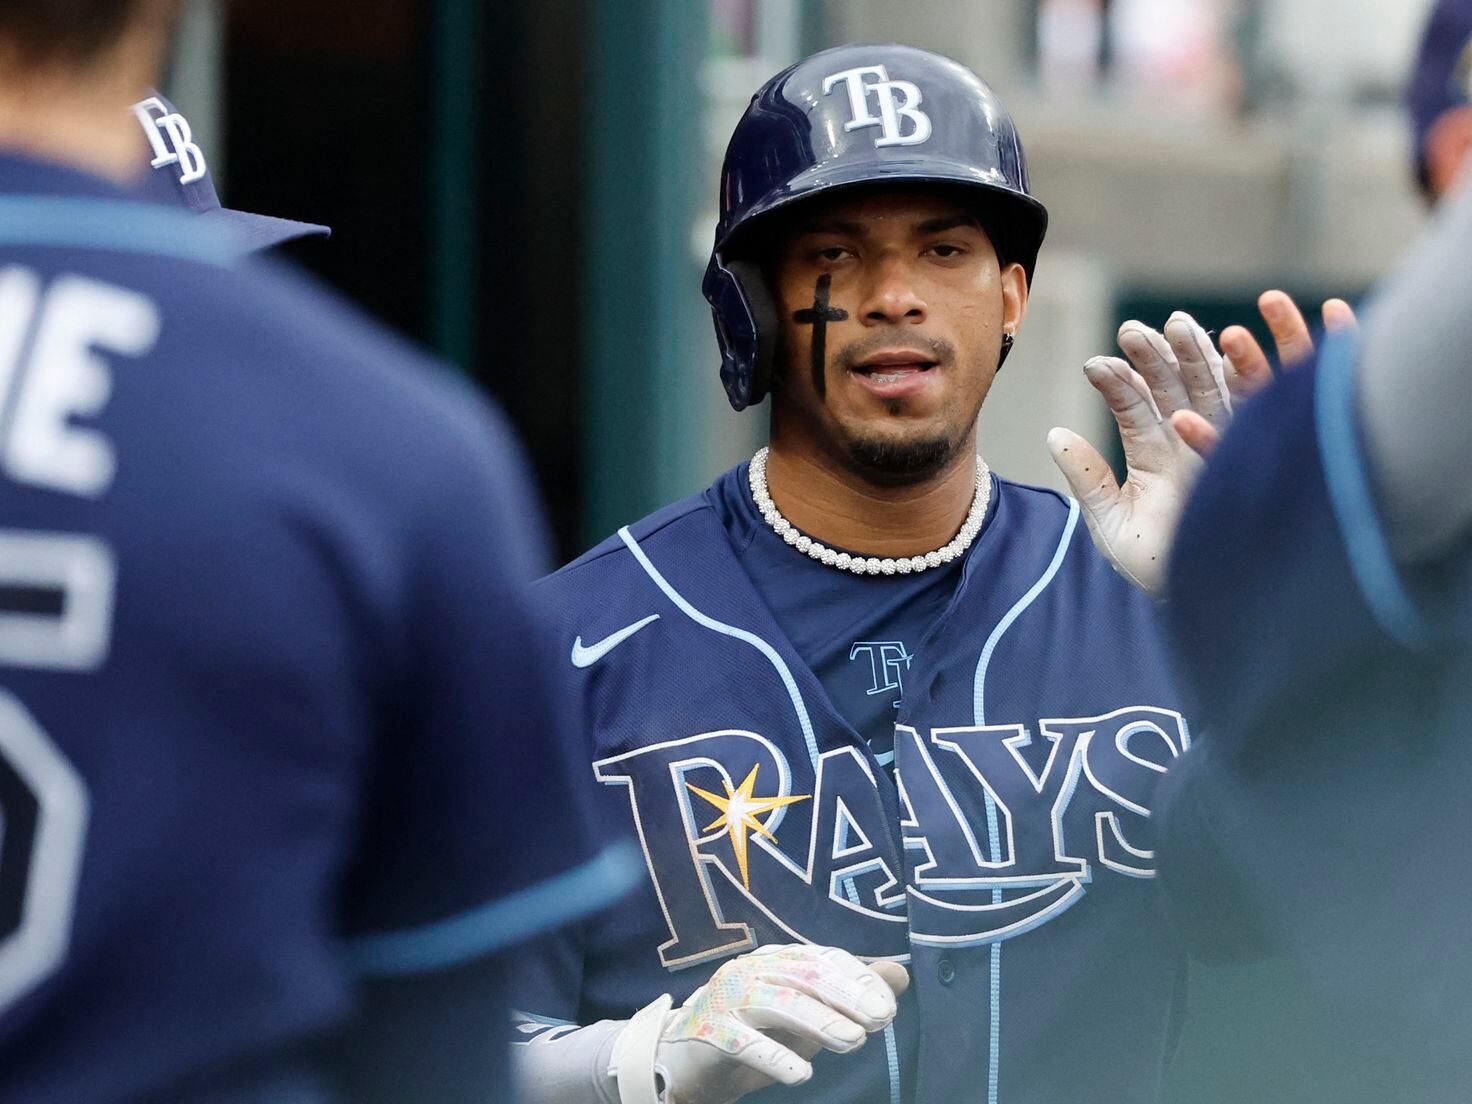 Rays' Wander Franco's wife revealed amid damning allegations